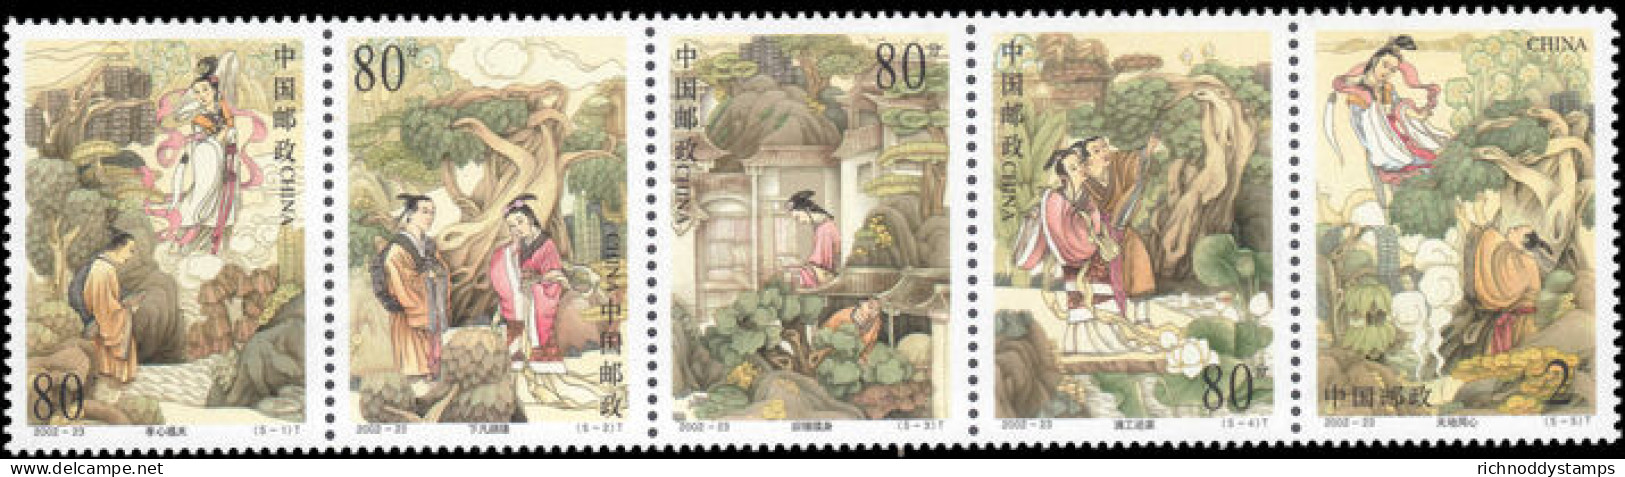 Peoples Republic Of China 2002 Tale Of Dong Yong And The Seventh Immortal Maiden Unmounted Mint. - Ungebraucht